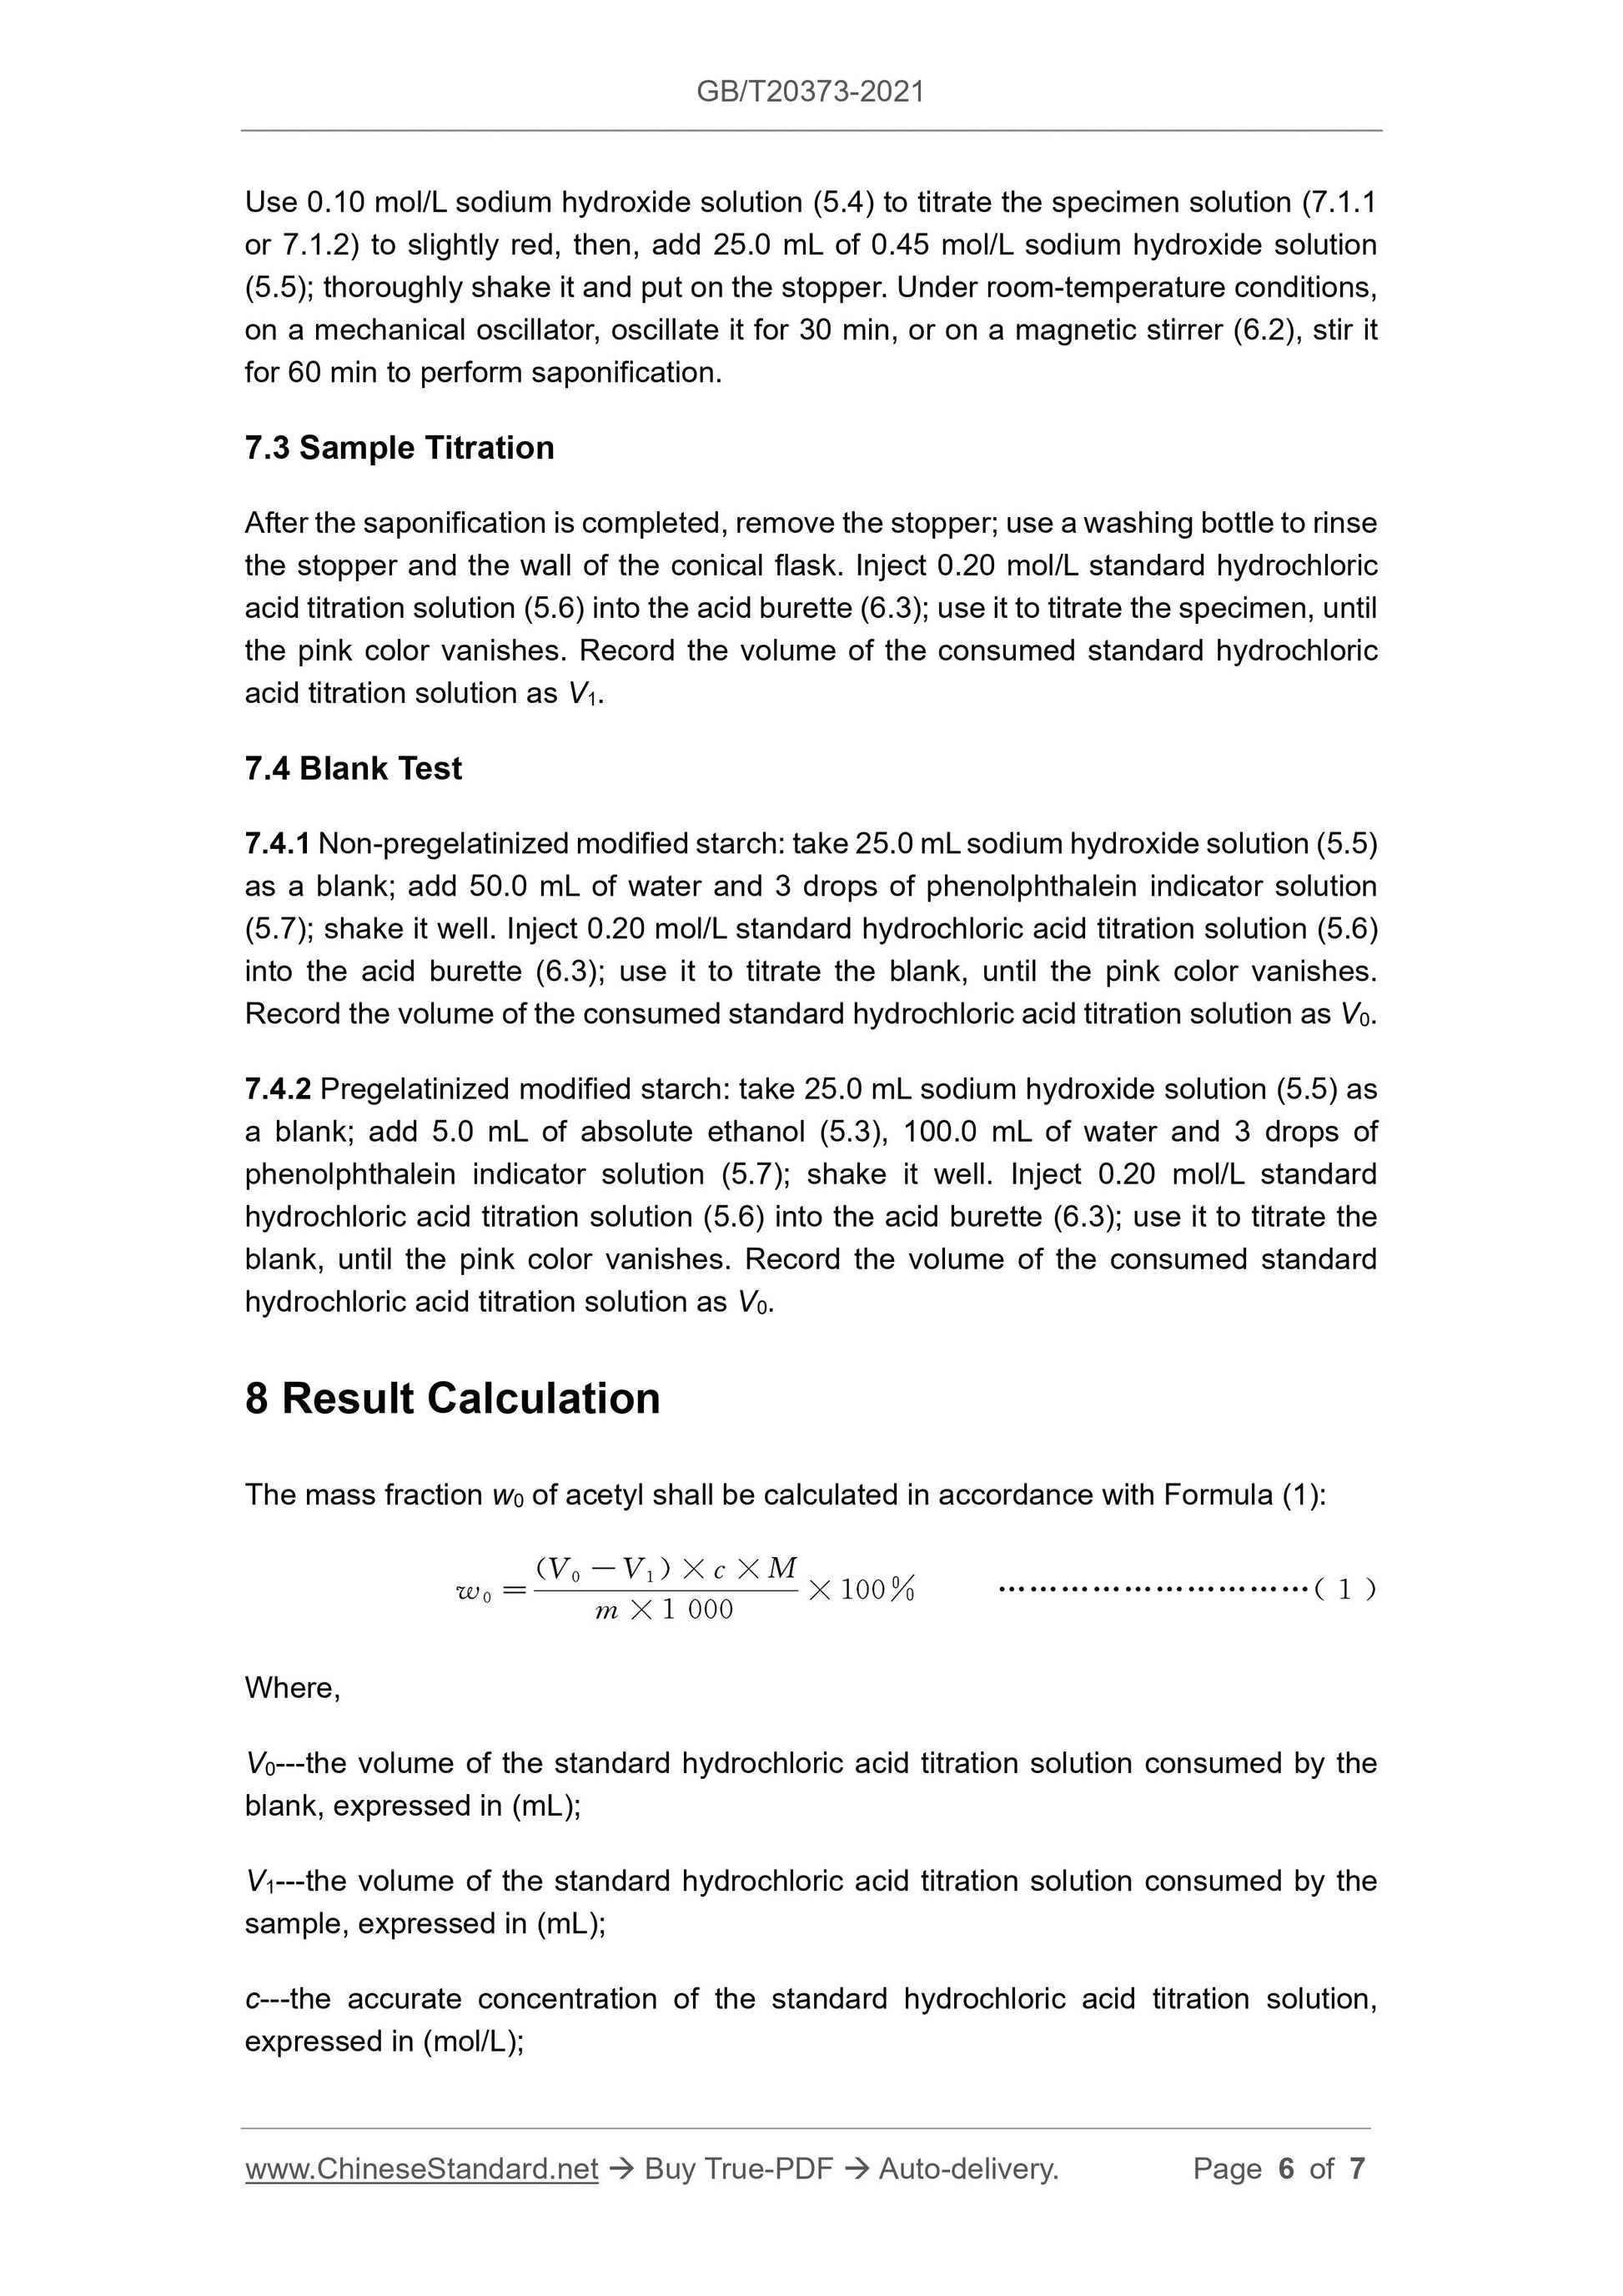 GB/T 20373-2021 Page 4